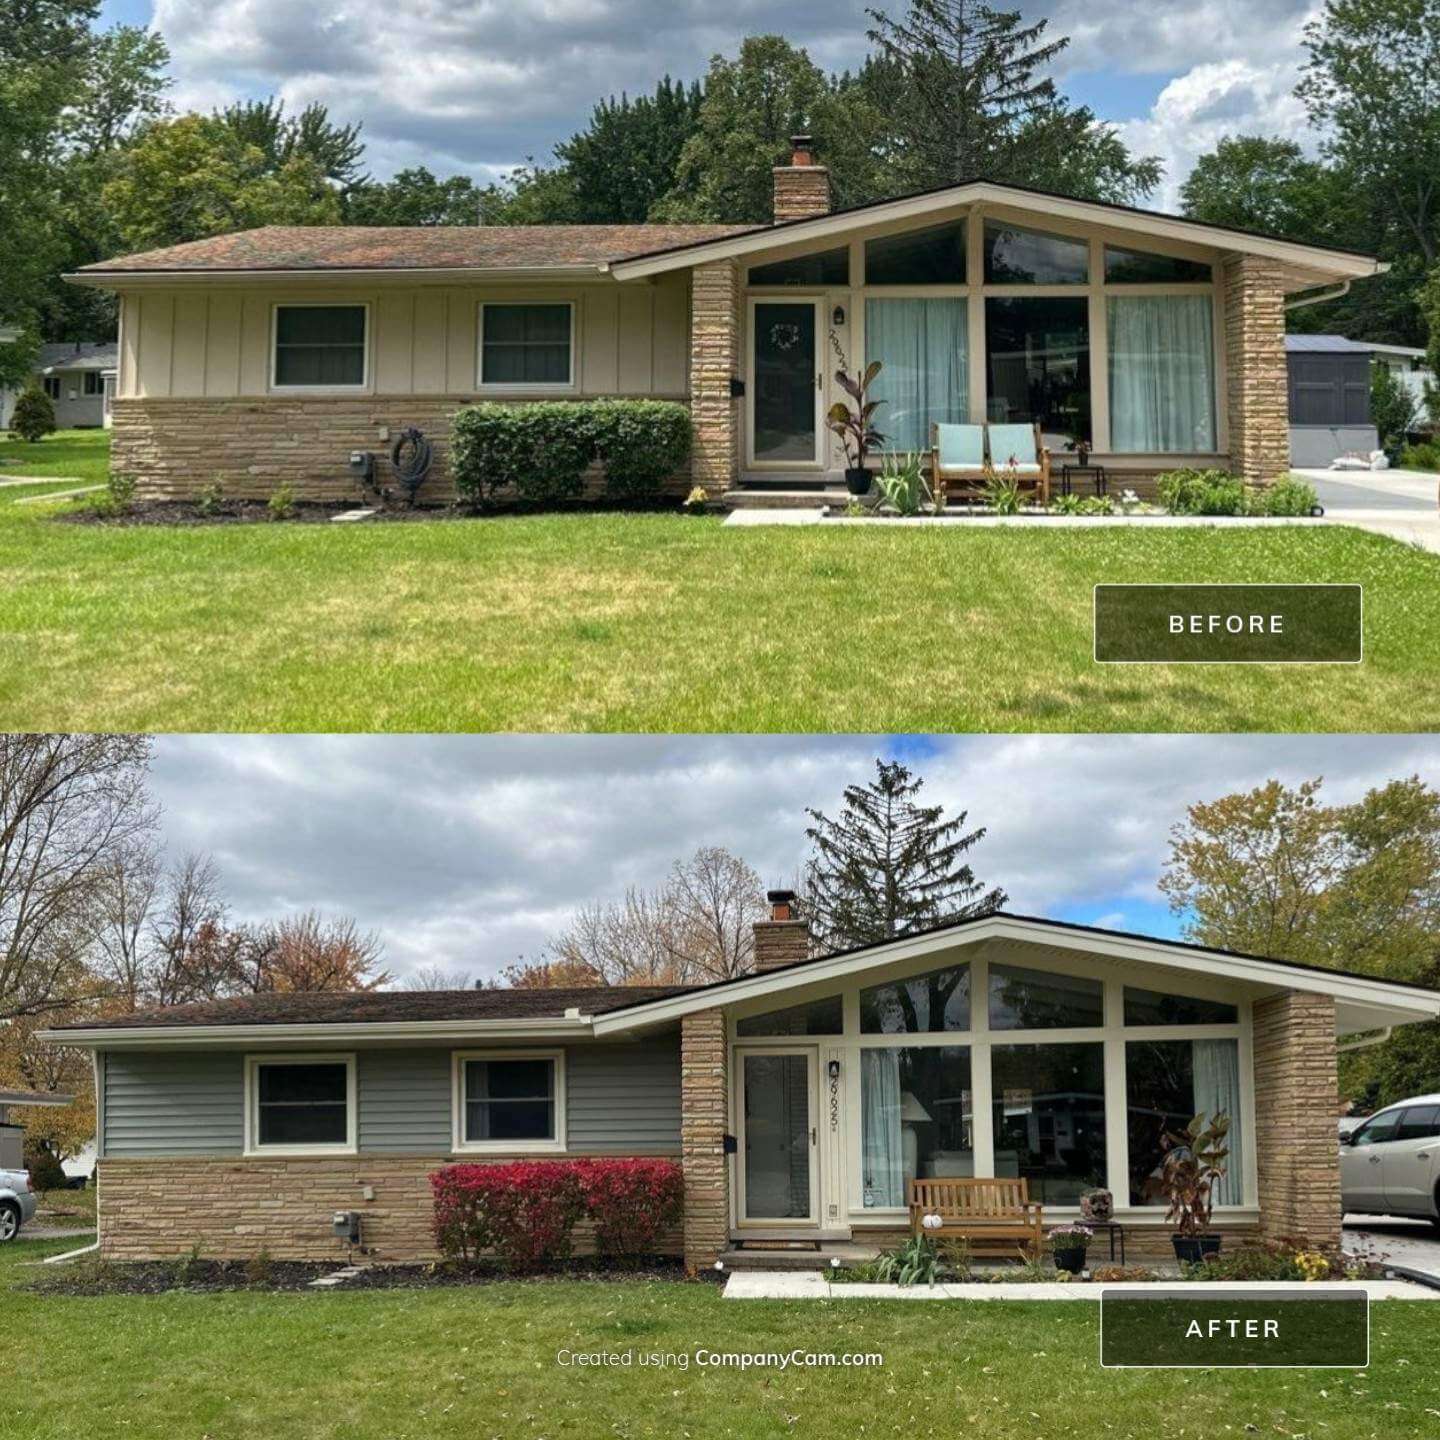 Before and after photos of house with new siding